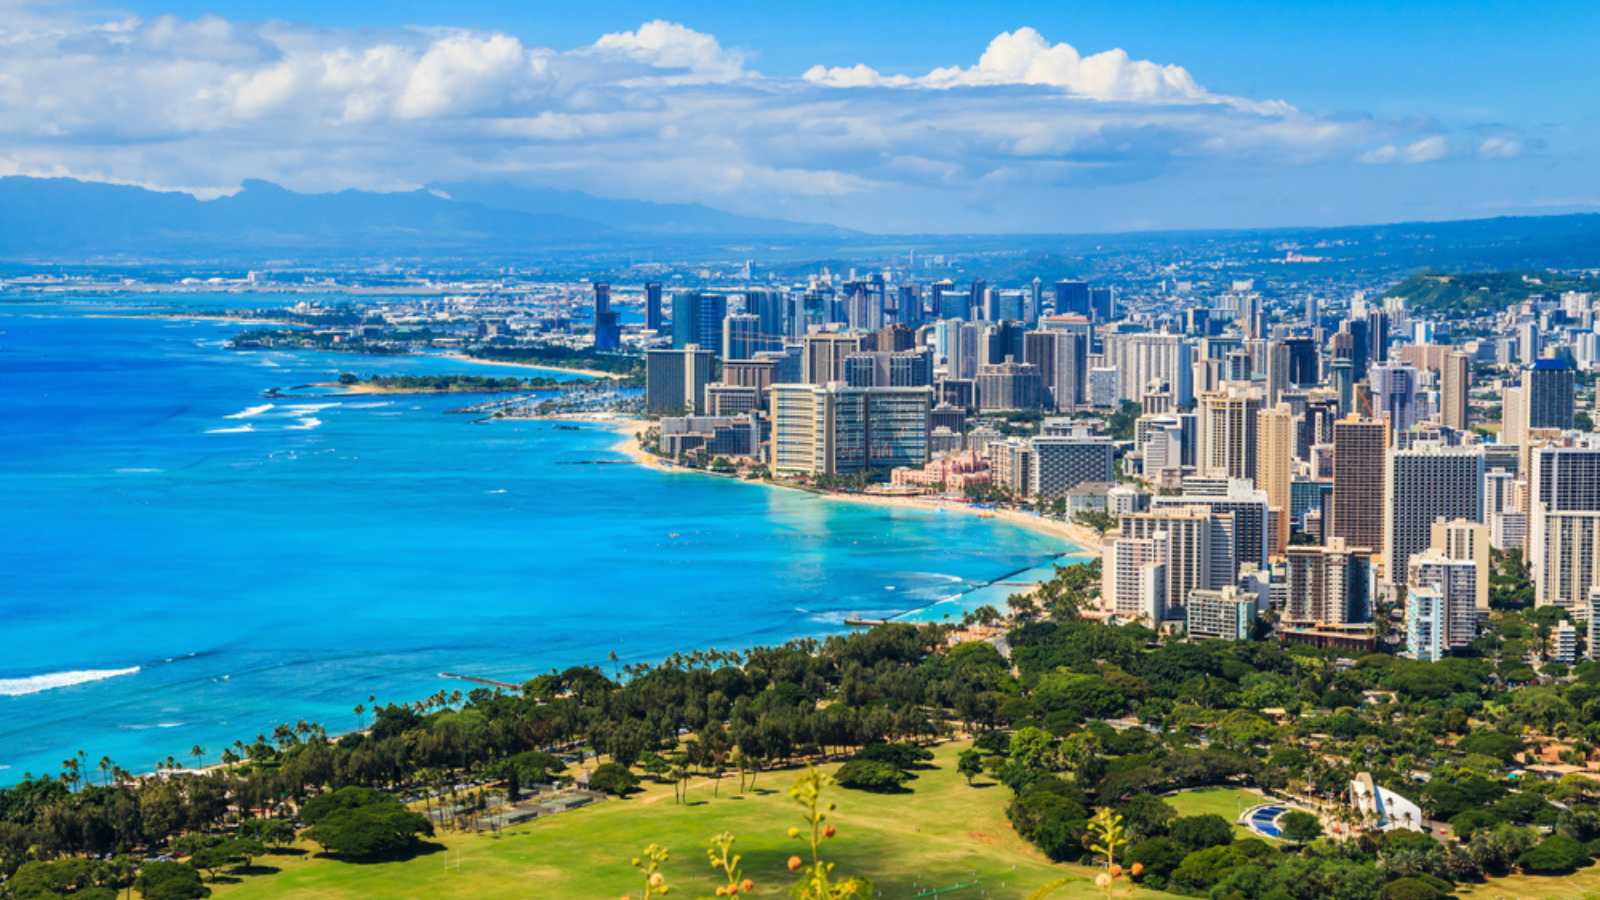 <p>Like those traveling to the Bahamas, a visitor to Hawaii might assume that they’ll find paradise regardless of where they land. While Honolulu is undoubtedly beautiful, former visitors warn that it contains more inauthentic, tourist-driven eyesores (an indoor gun range?) than other Hawaiian locales.</p>